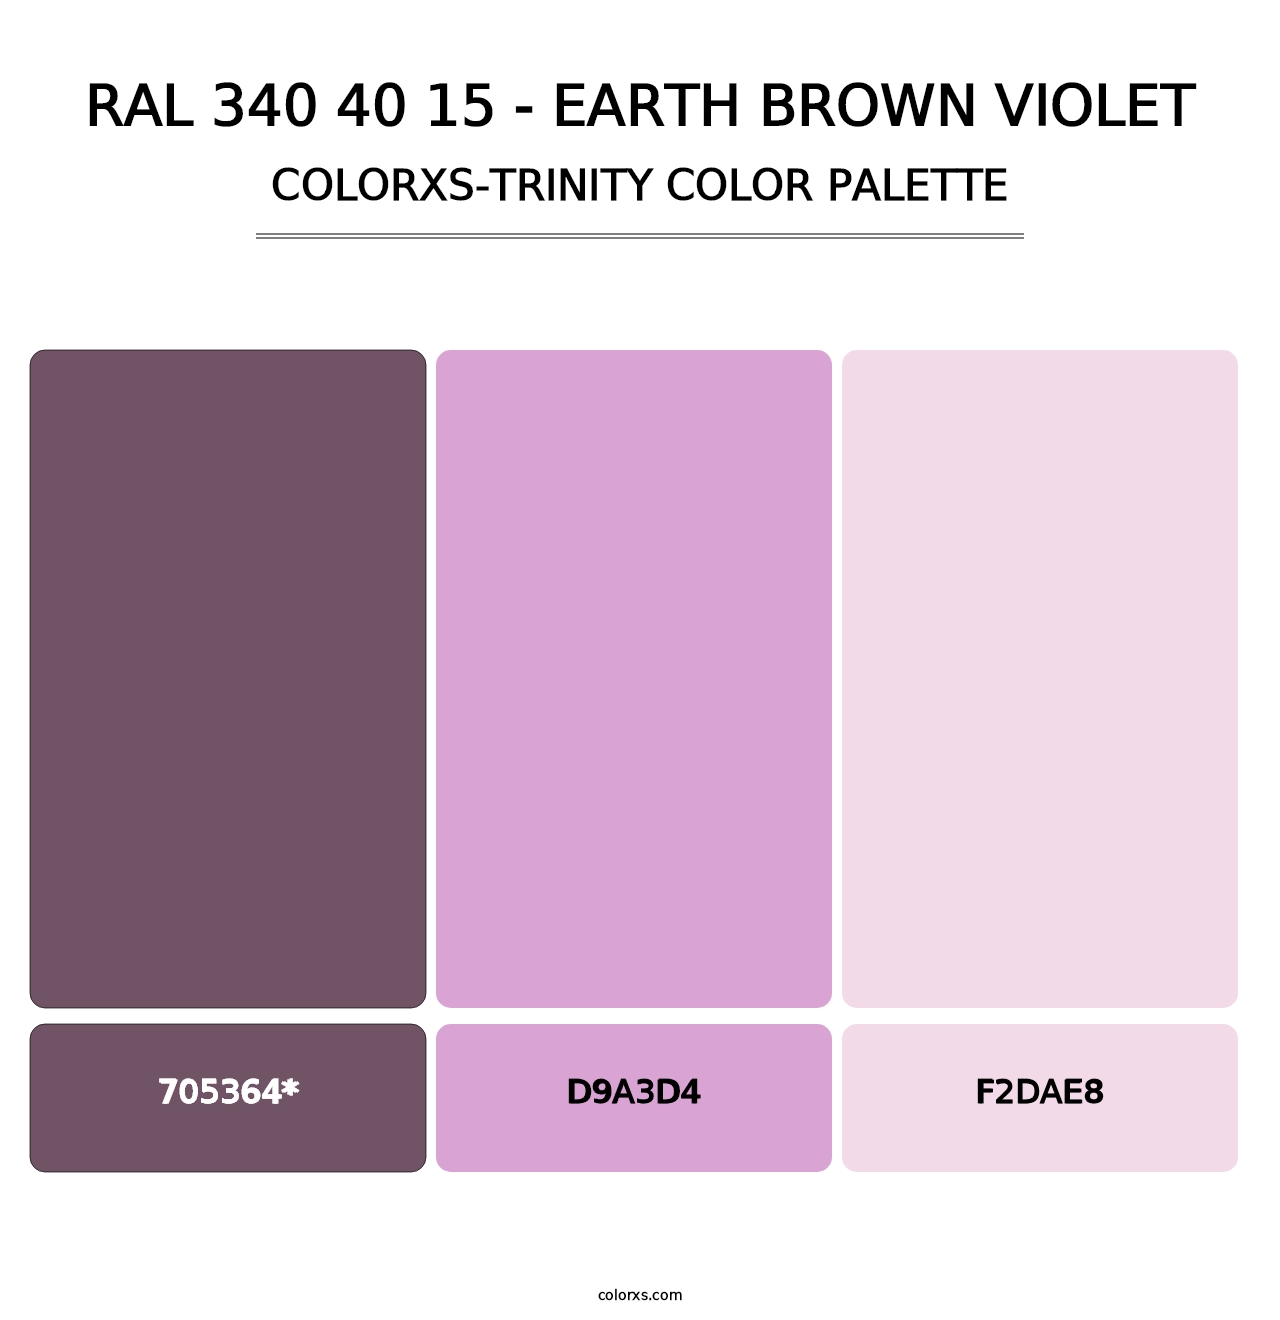 RAL 340 40 15 - Earth Brown Violet - Colorxs Trinity Palette